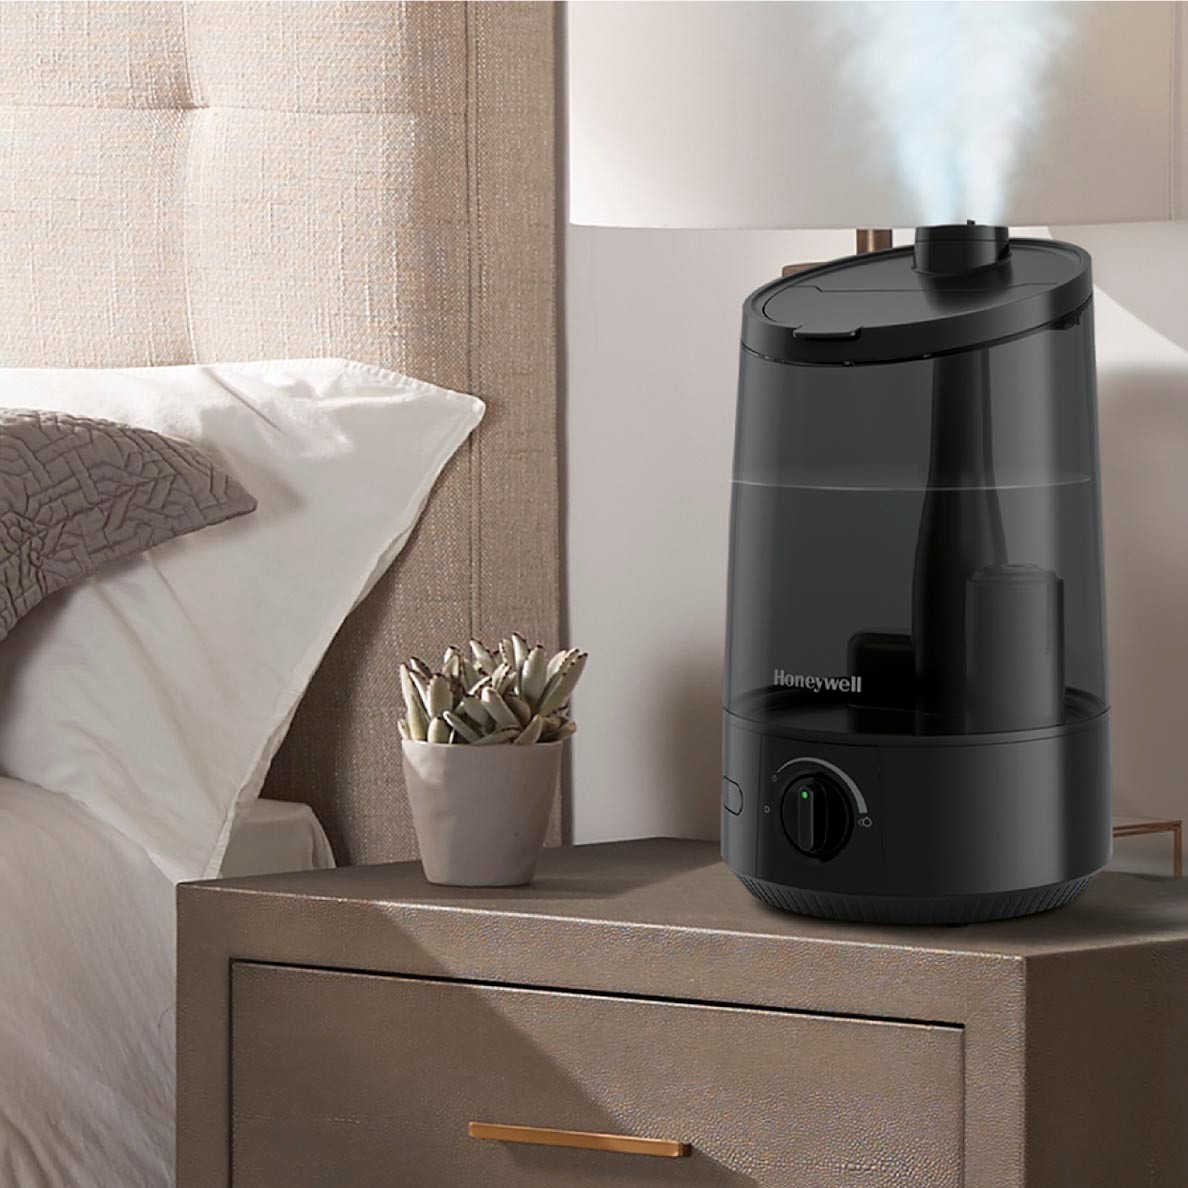 https://s3-assets.sylvane.com/media/images/products/honeywell-hul585b-top-fill-ultrasonic-cool-mist-humidifier-lifestyle.jpg